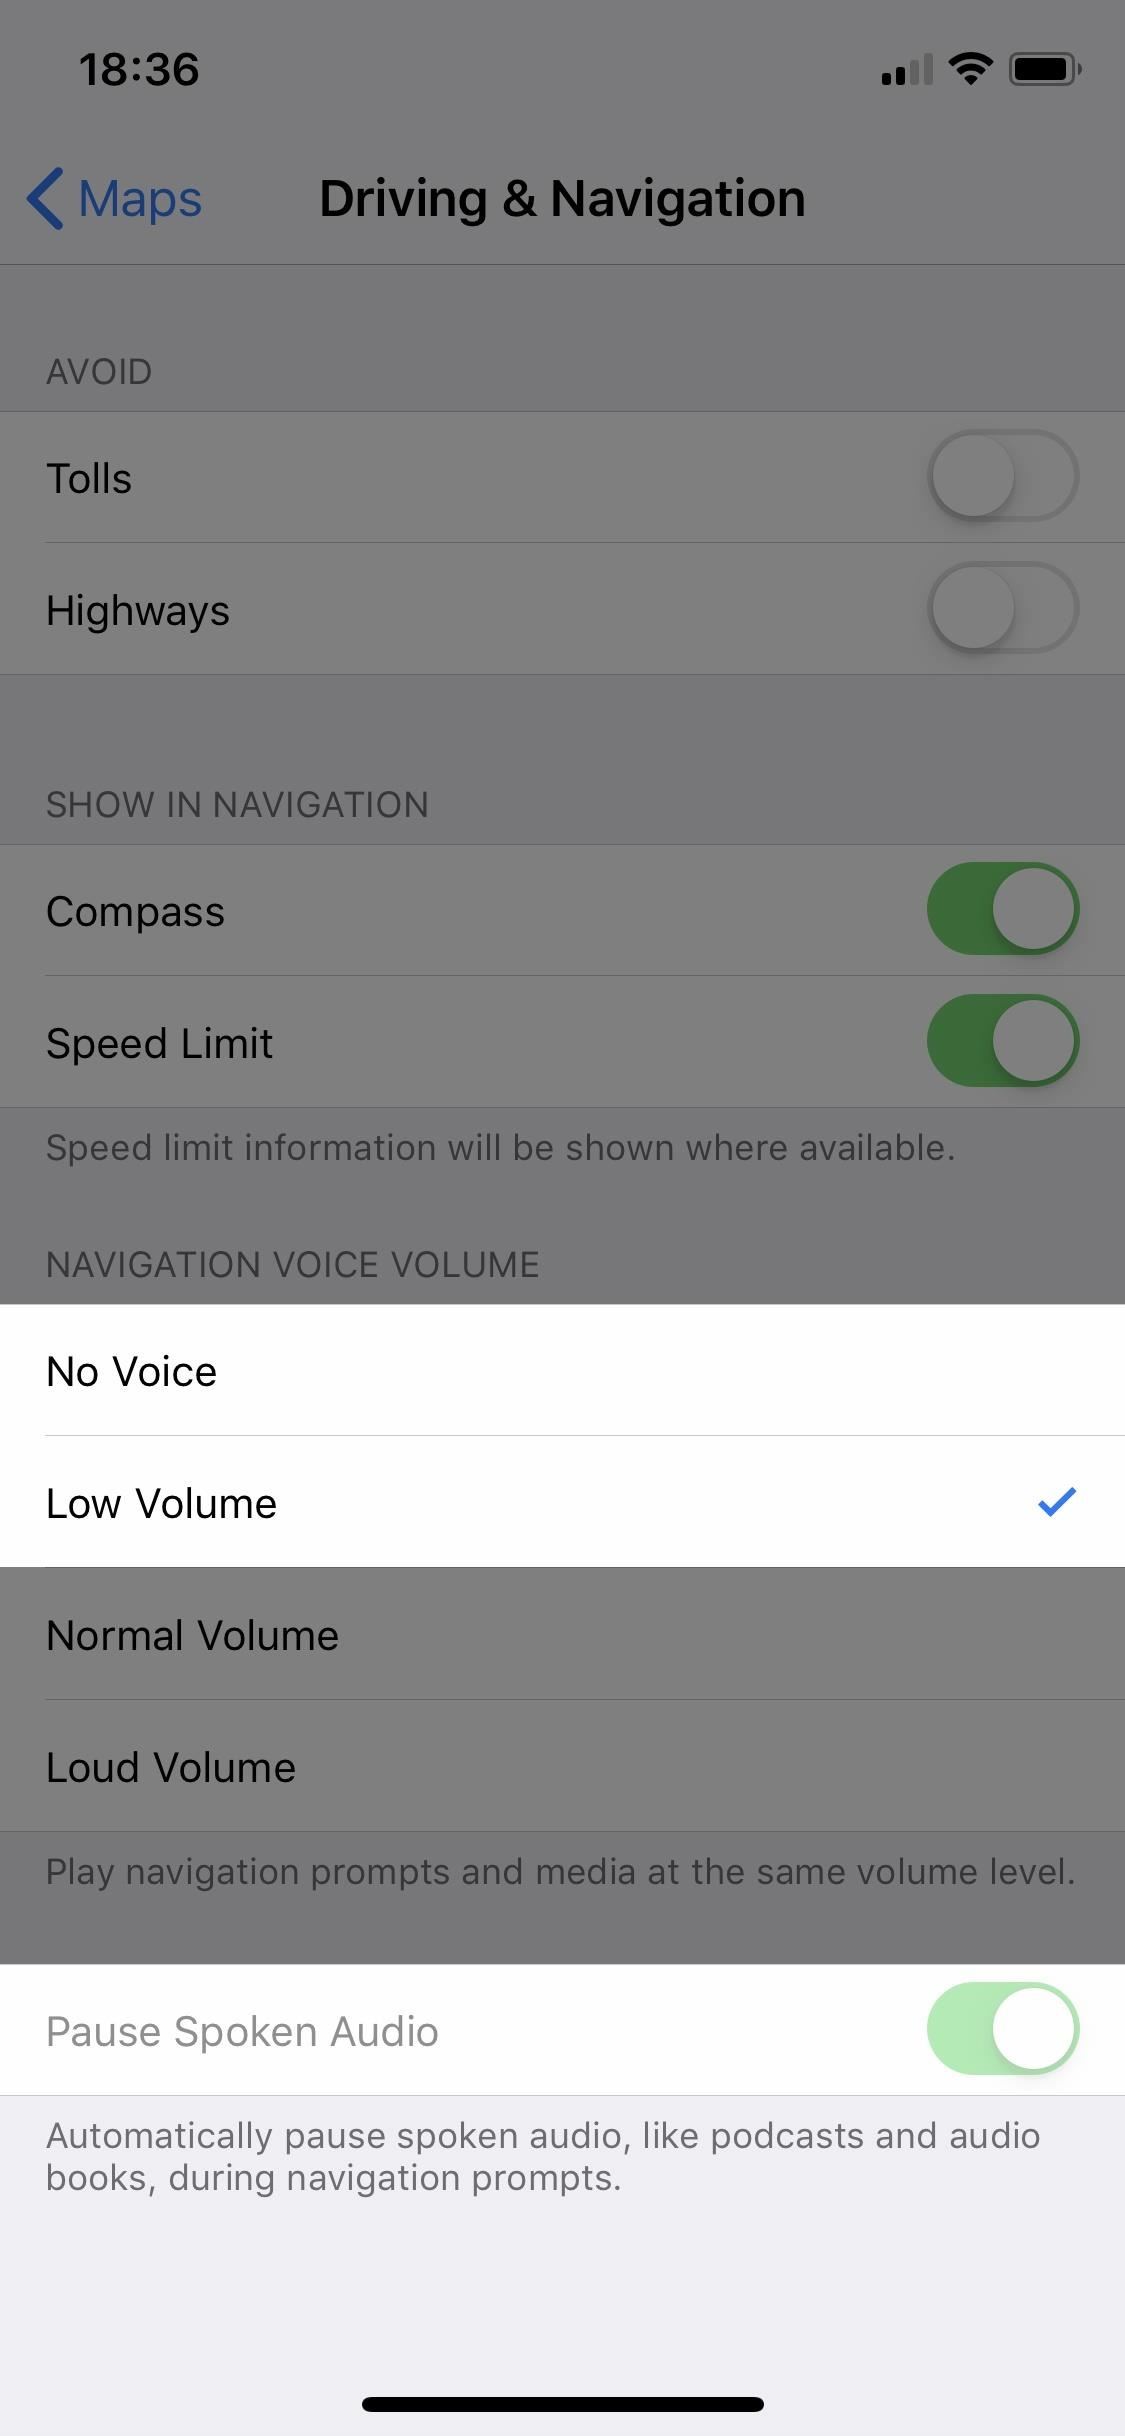 How to Customize Navigation Prompts on Apple Maps for Clearer Spoken Directions